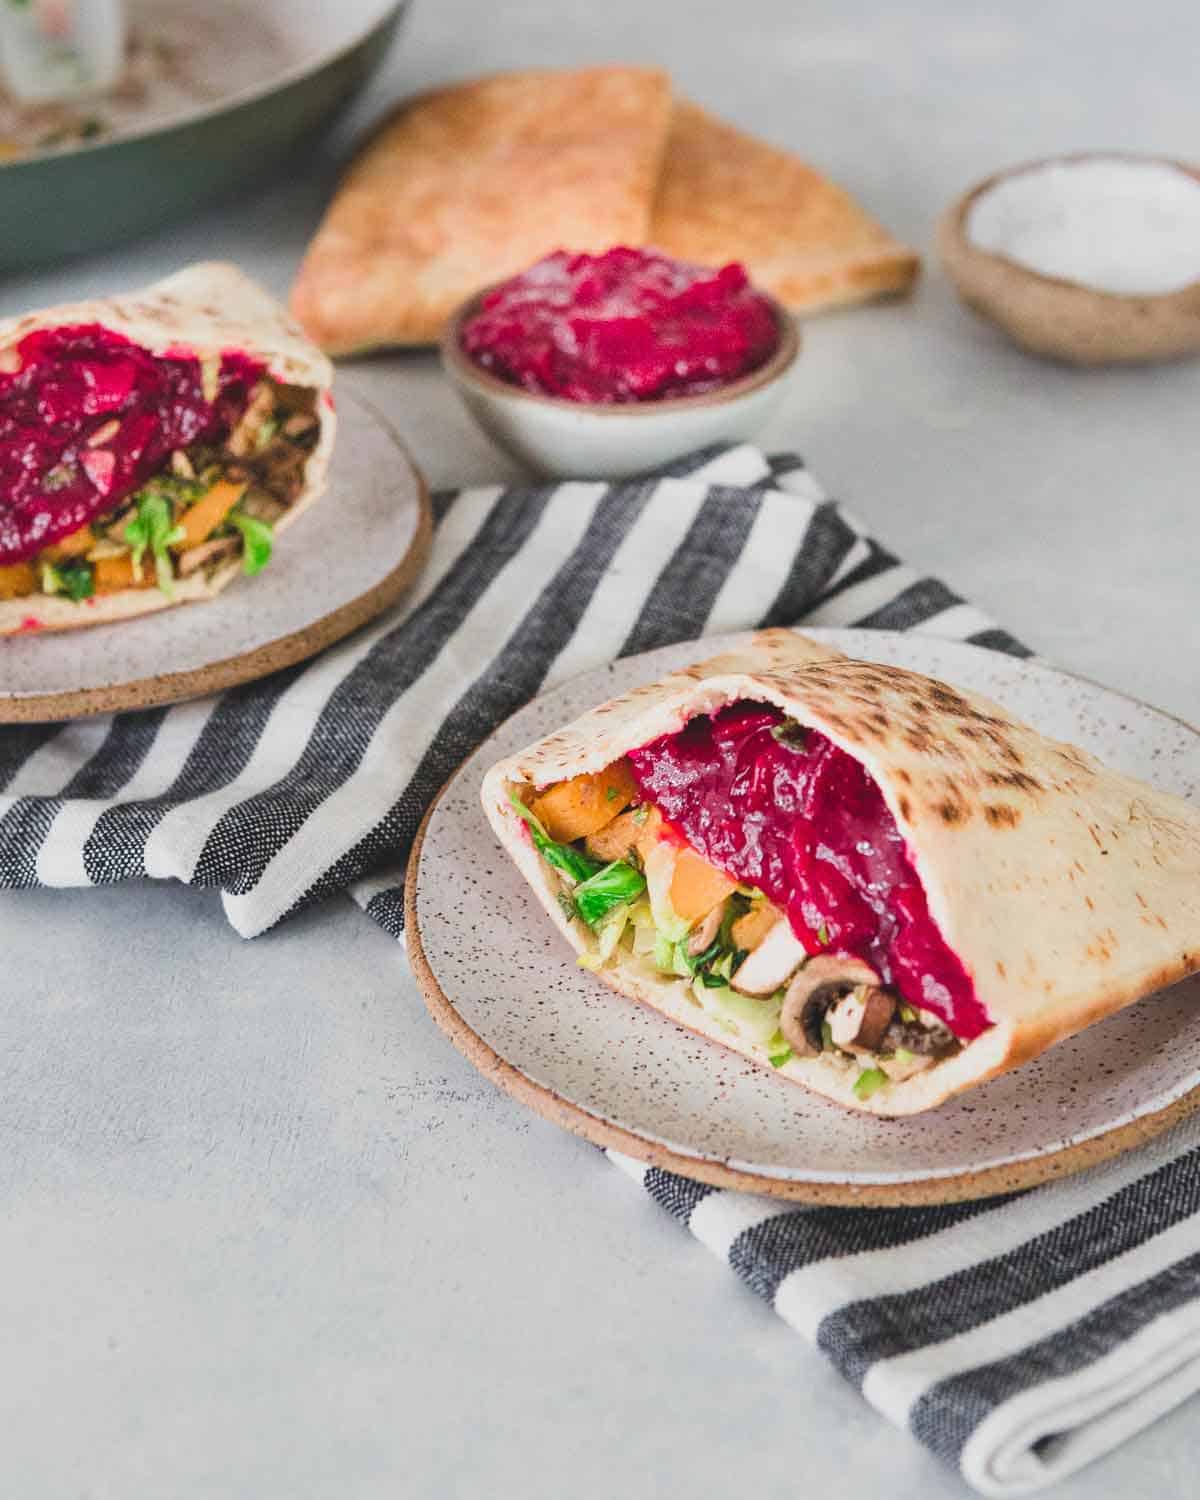 Enjoy Thanksgiving leftovers in a healthier way with this cranberry vegetable pita sandwich.